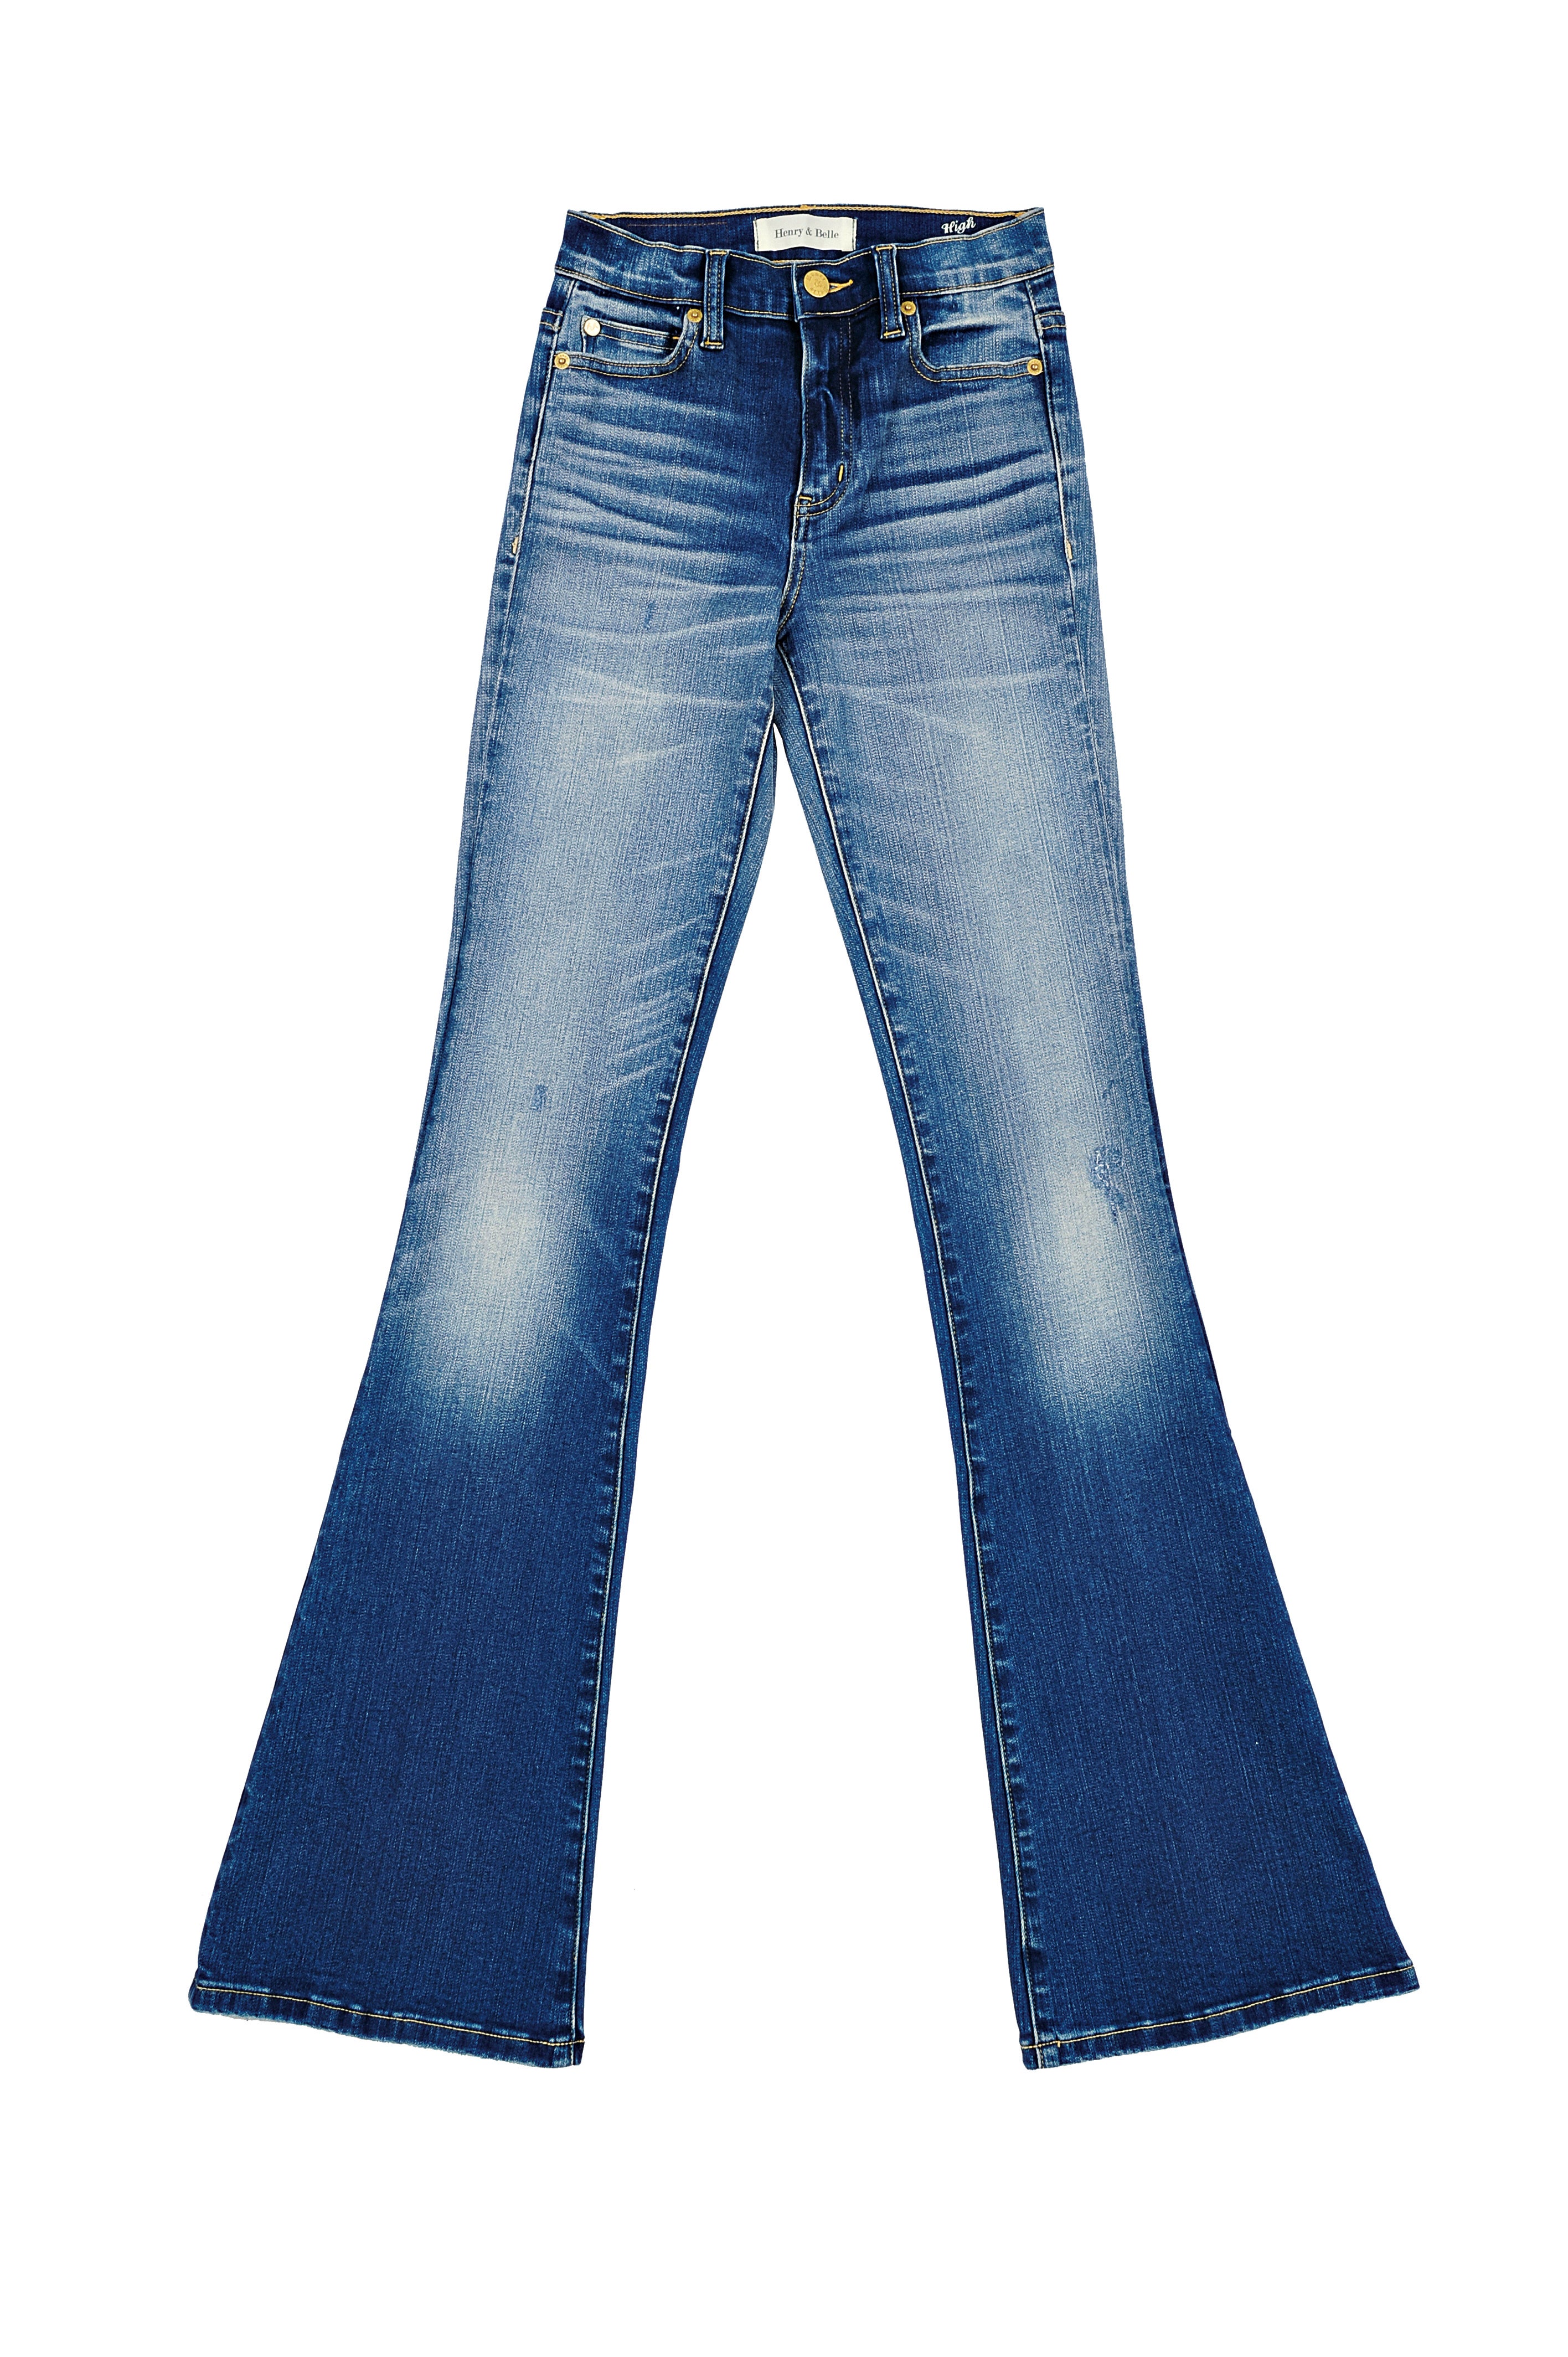 All About The Blues: ESSENCE’s Denim Guide